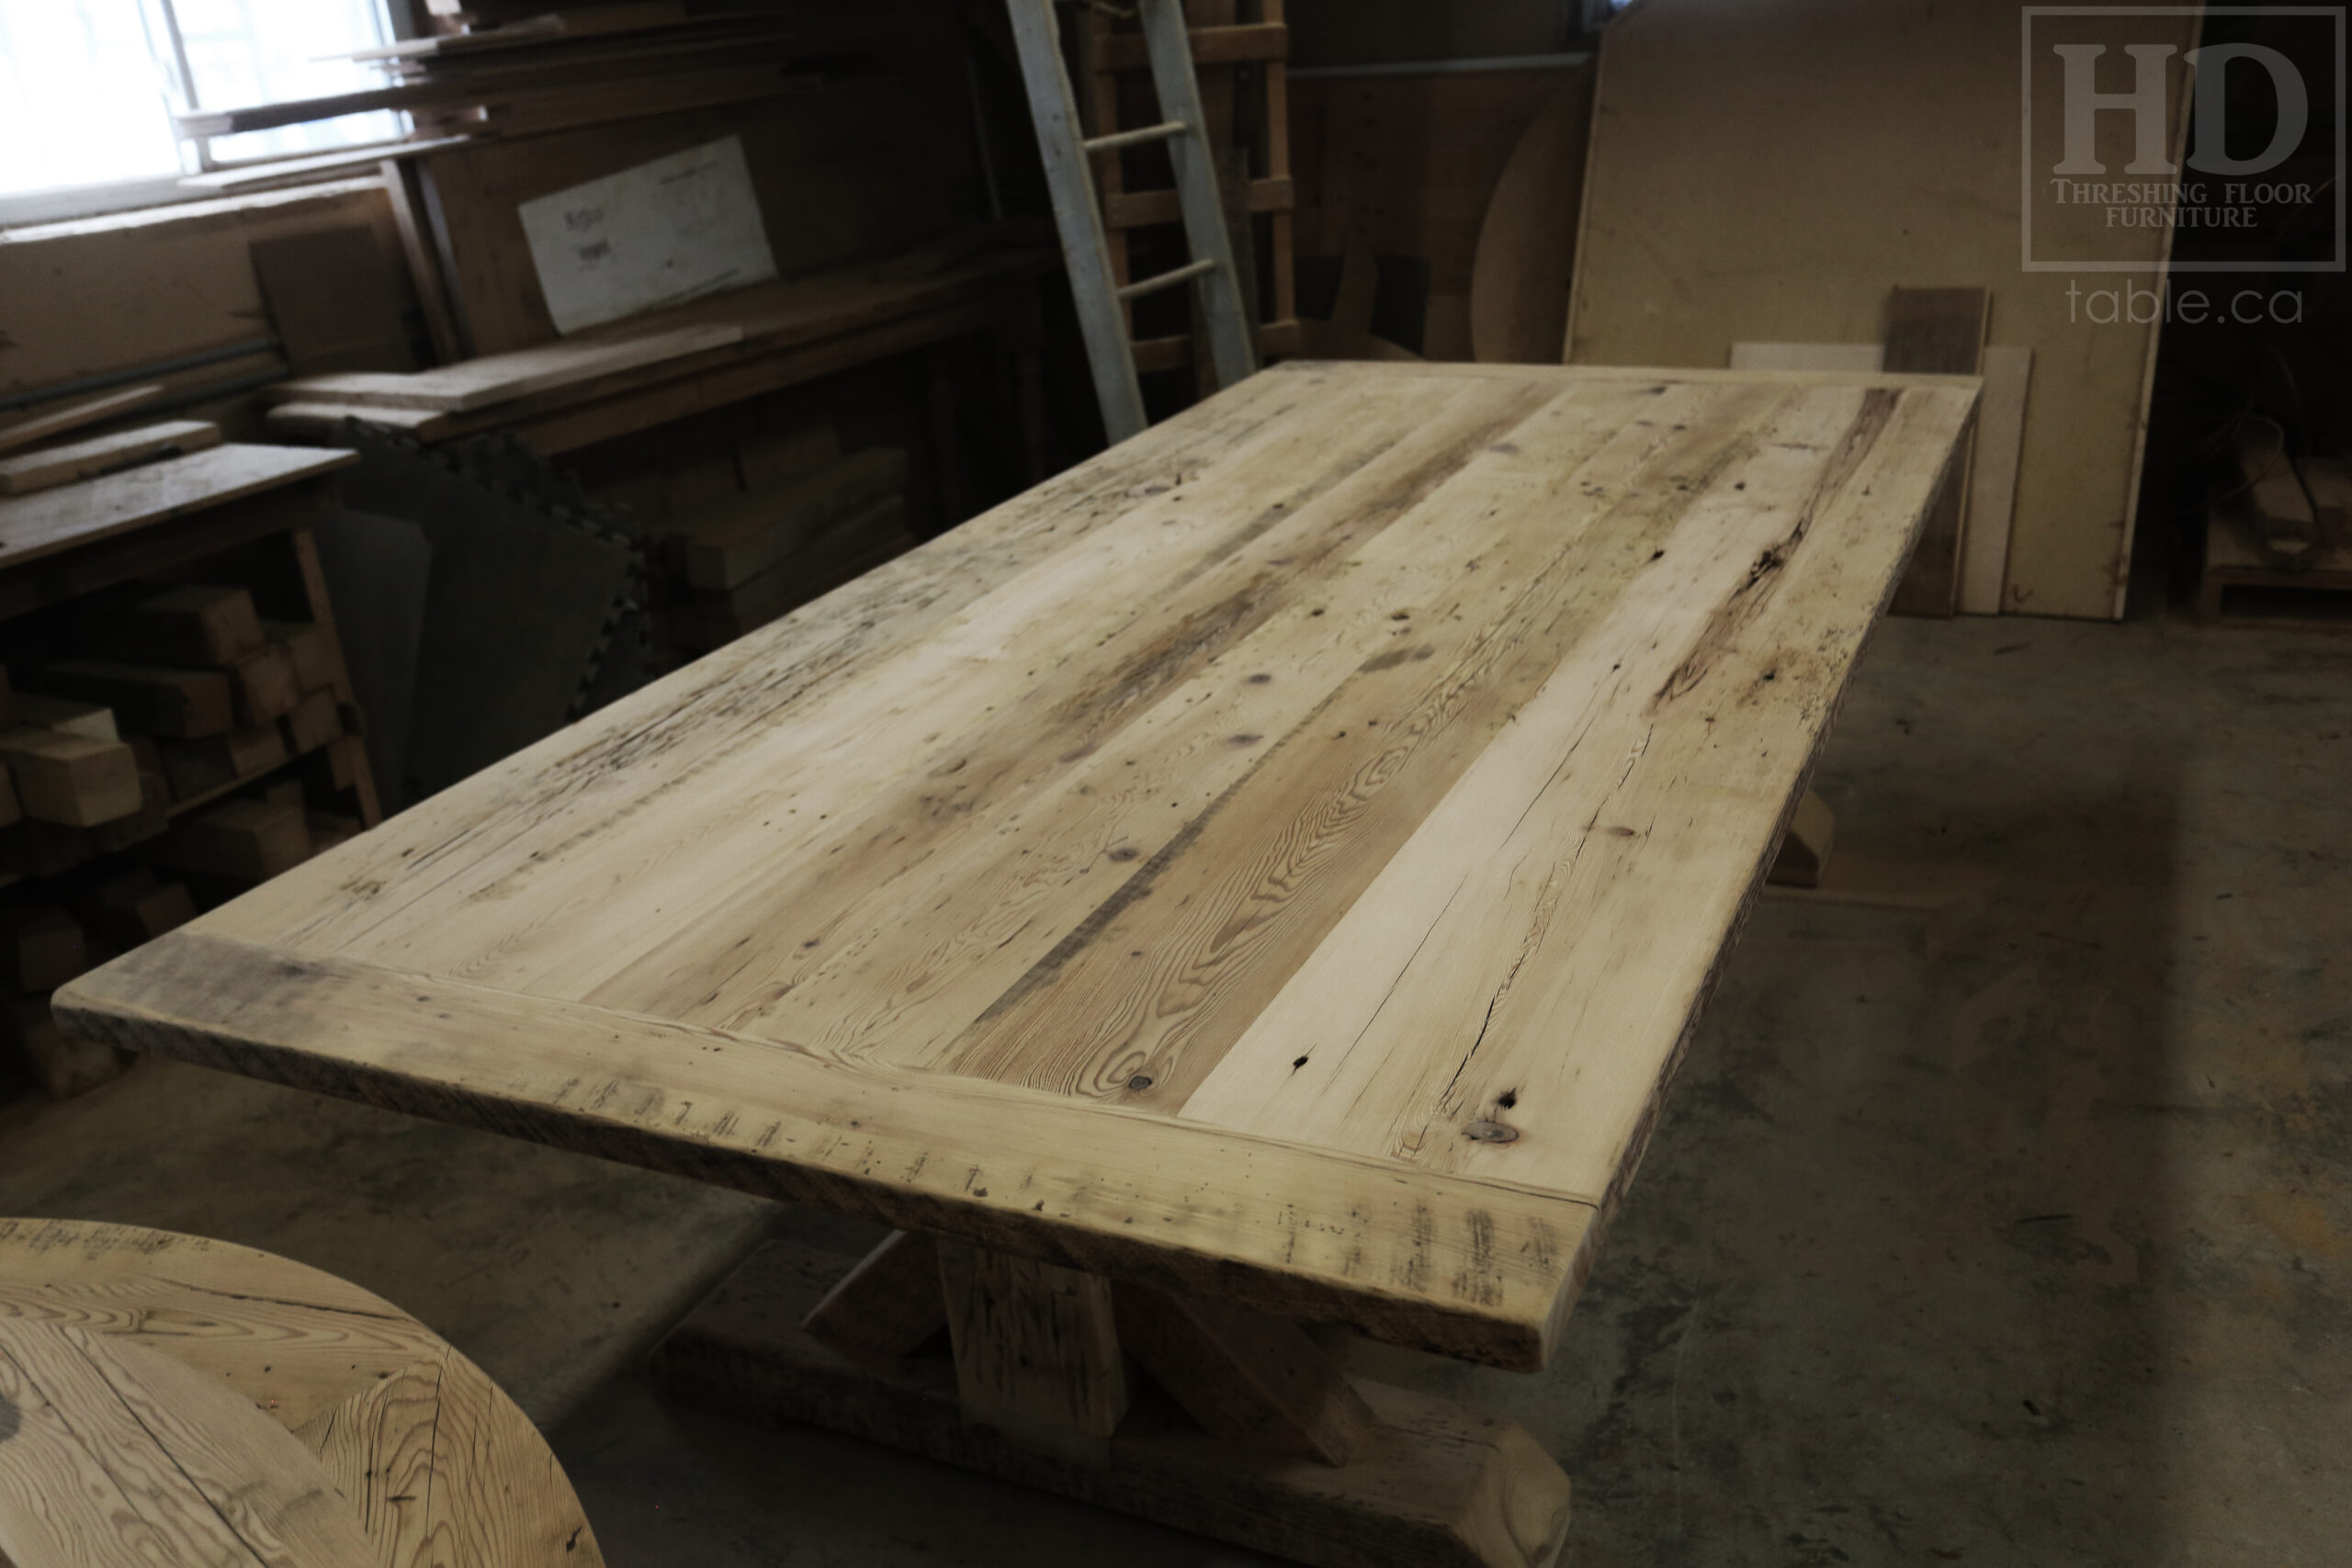 Project Summary: 9.5’ Reclaimed Ontario Barnwood Table we made for a Rockwood, Ontario home – 4.5’ wide – Sawbuck Base [Beam Type Option] - Old Growth Hemlock Threshing Floor Construction - Original edges & distressing maintained – Bread Edge Boards – Premium epoxy + matte polyurethane finish -  www.table.ca